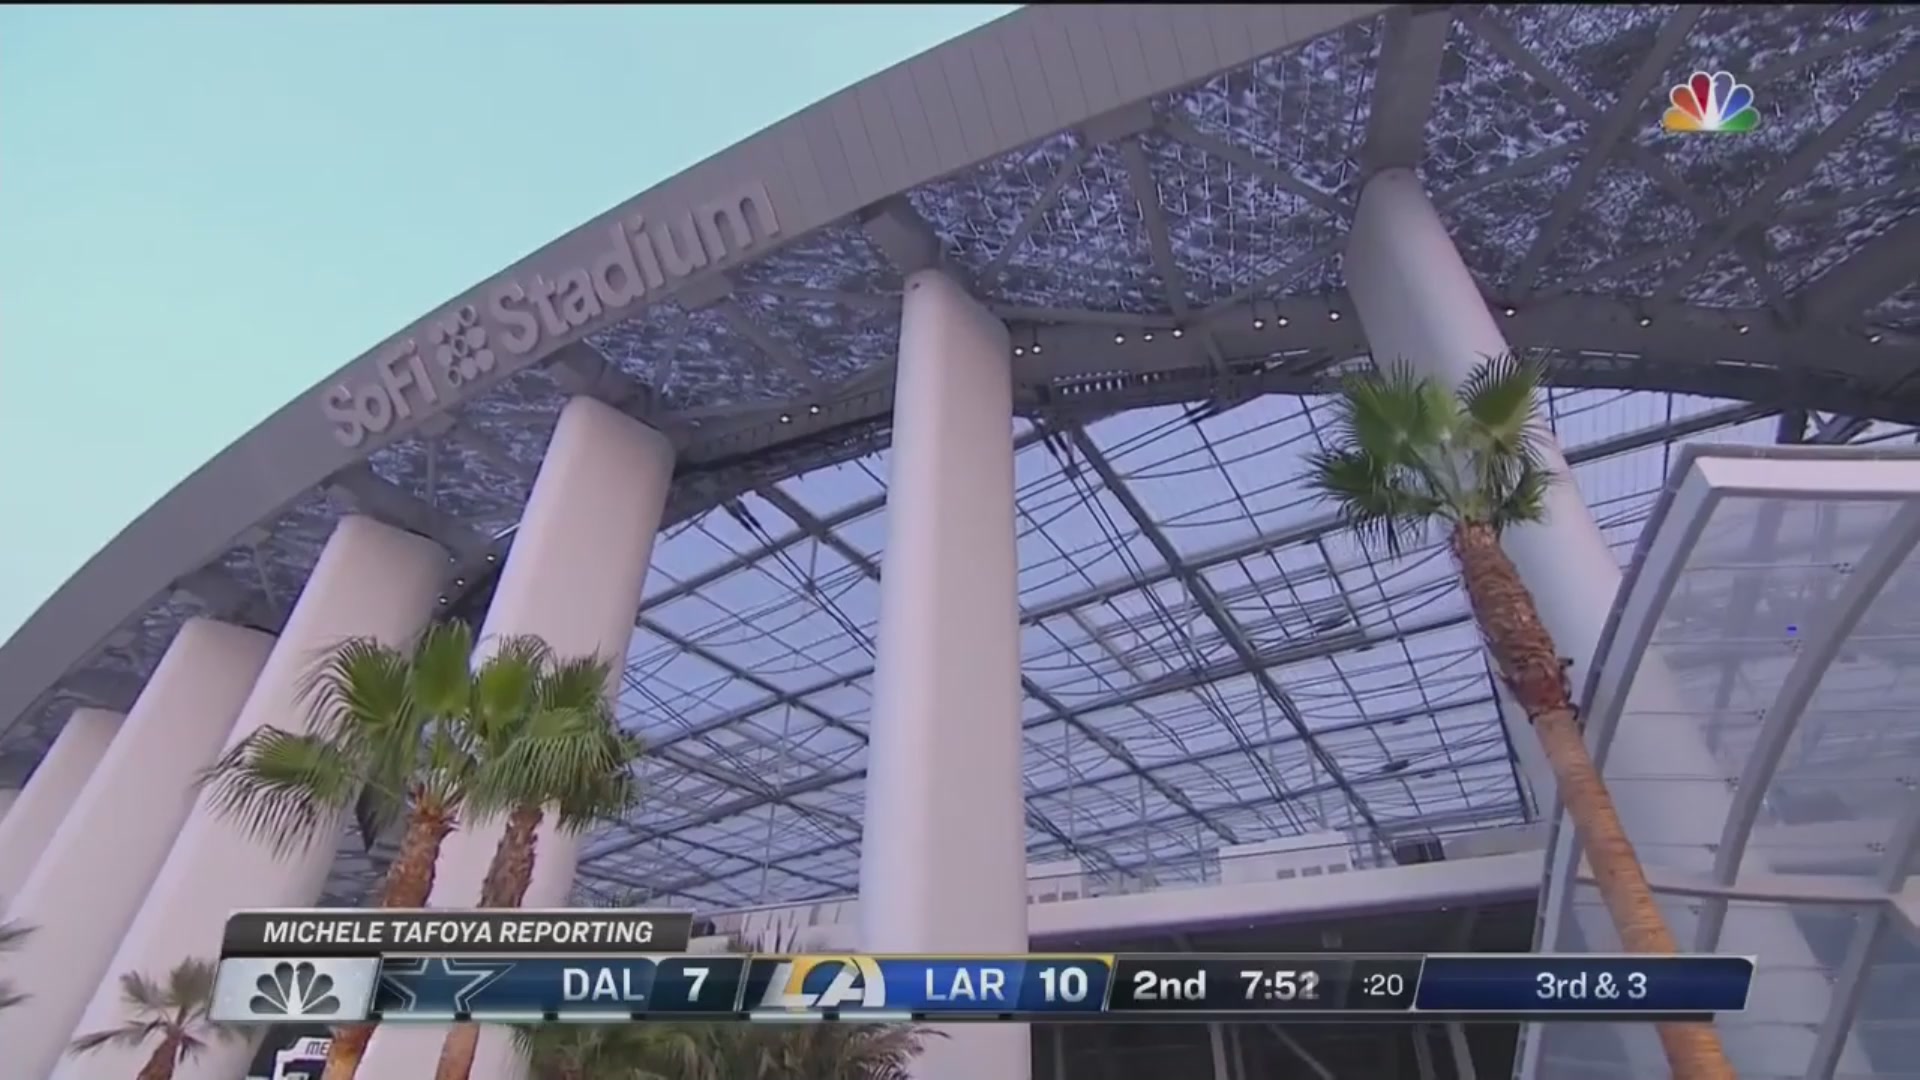 A screenshot from NBC of the new Los Angeles stadium